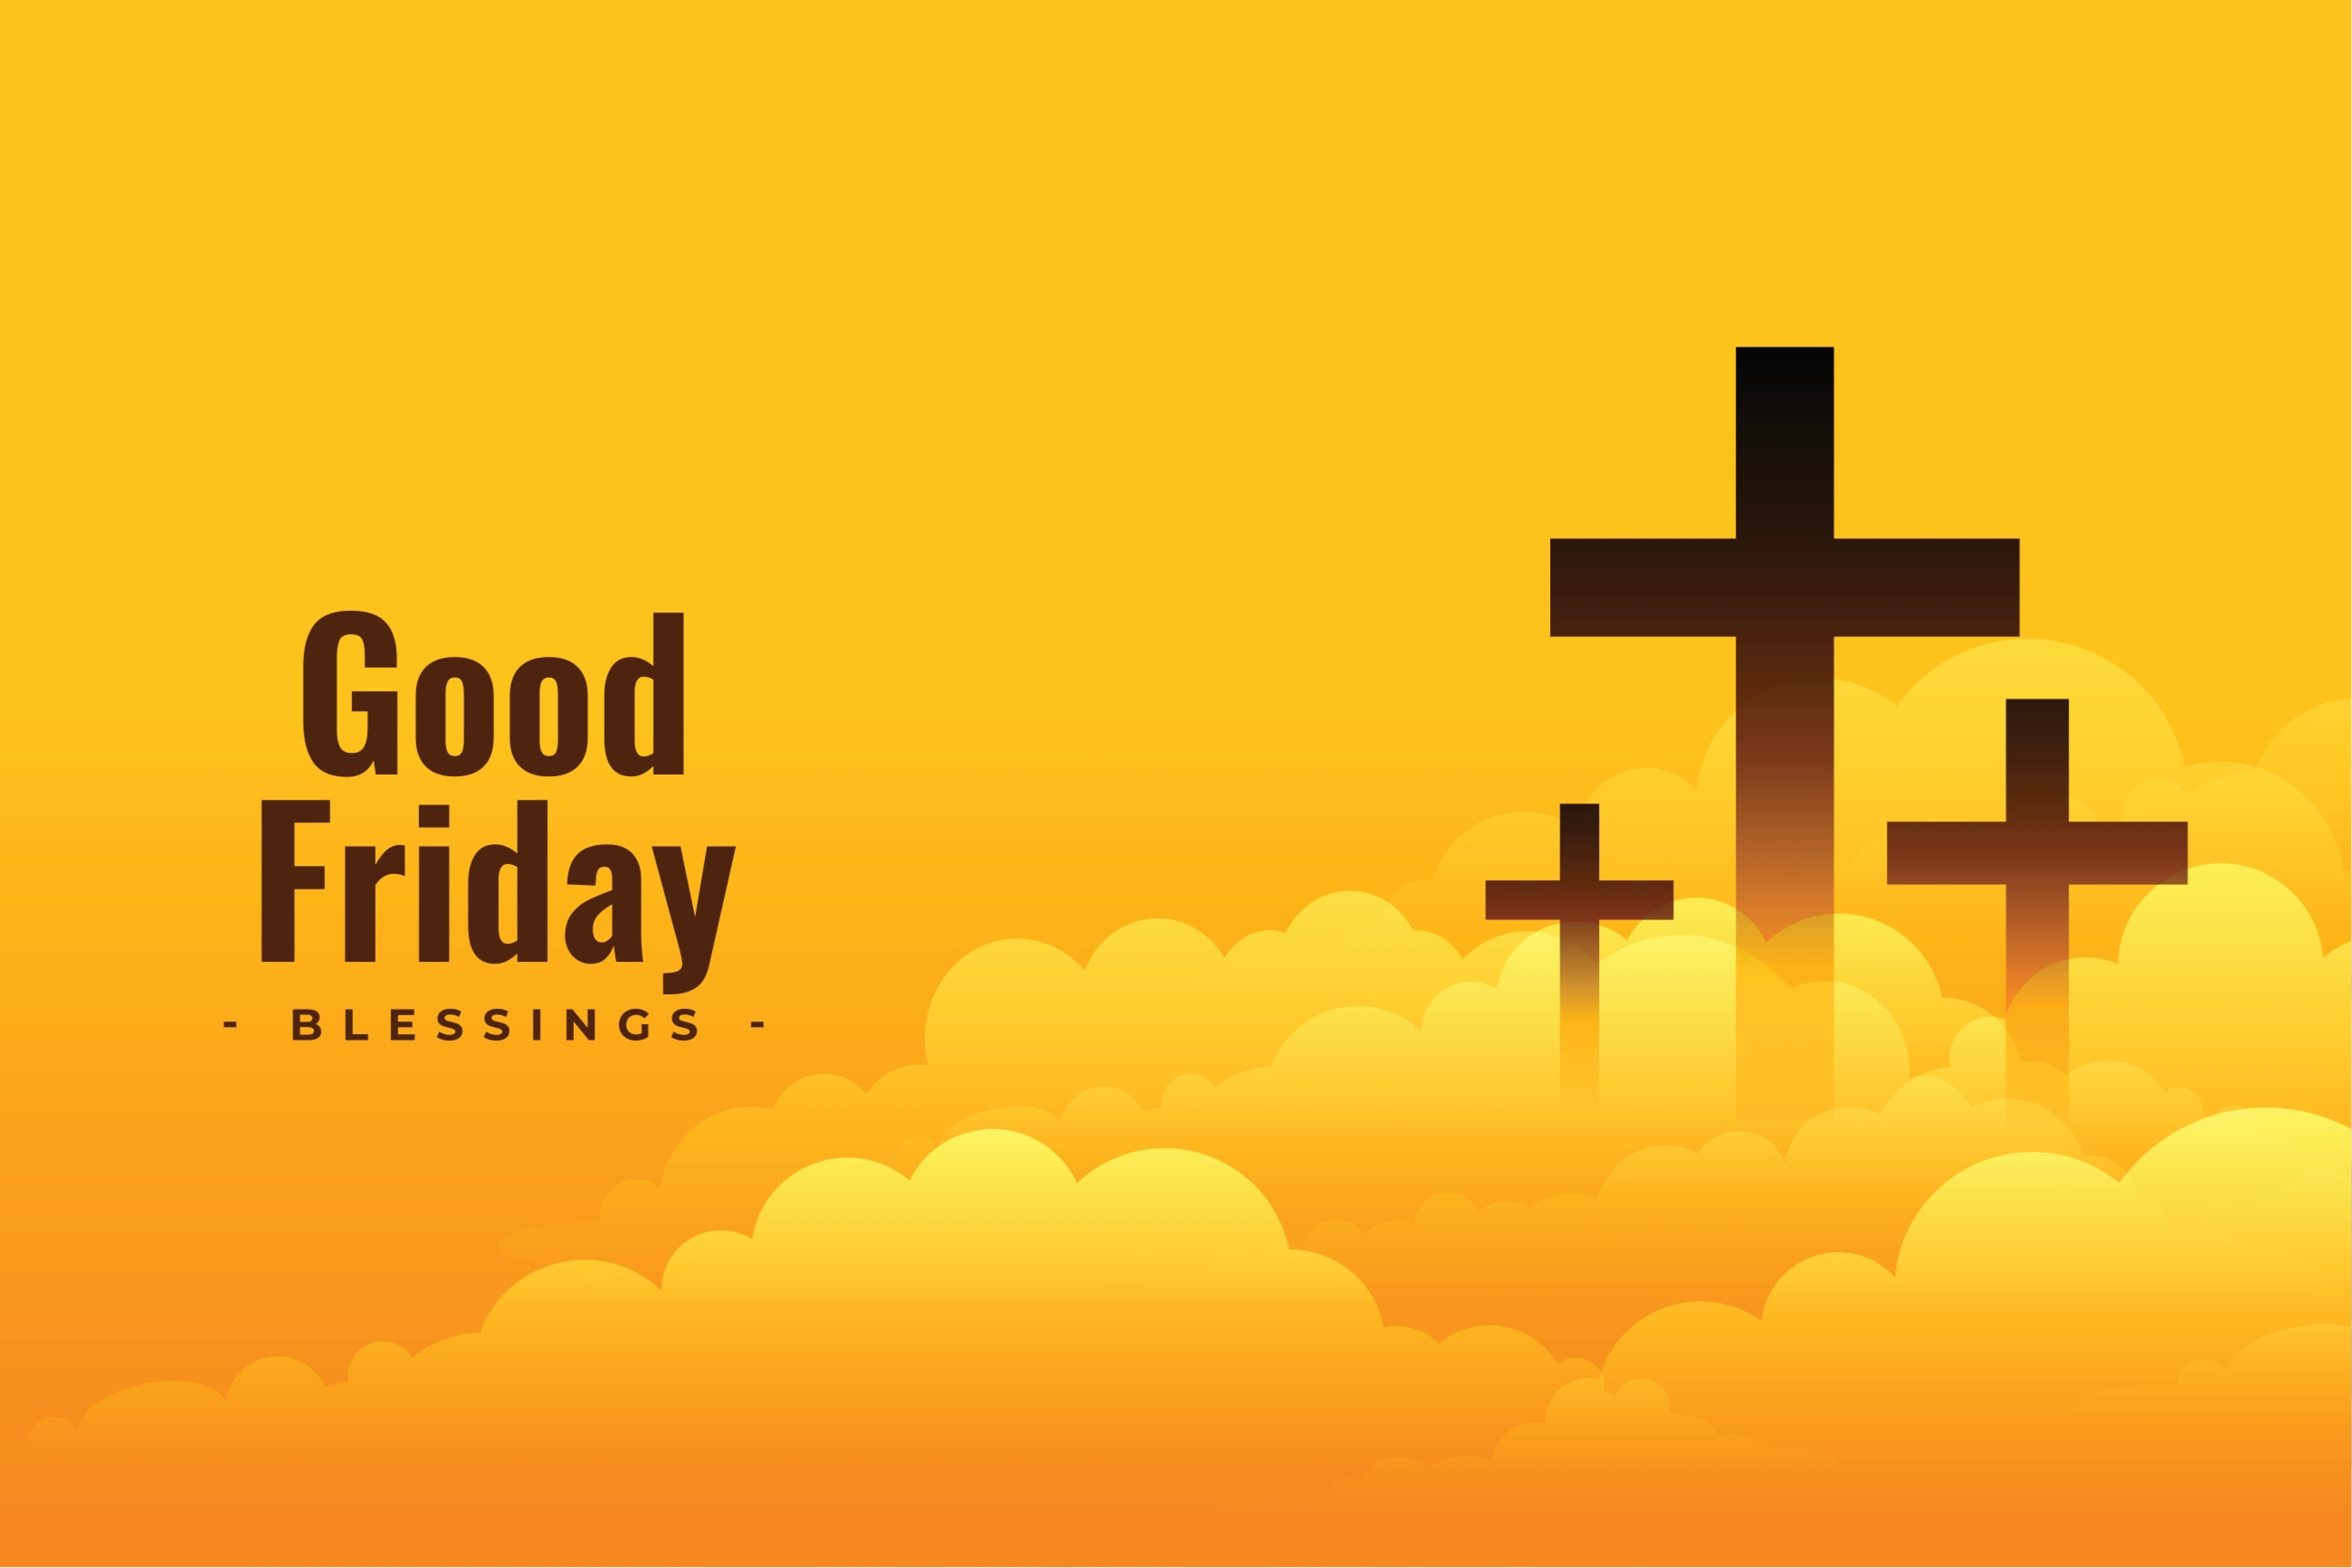 Things You Can Do On Good Friday|5 Good Friday Traditions